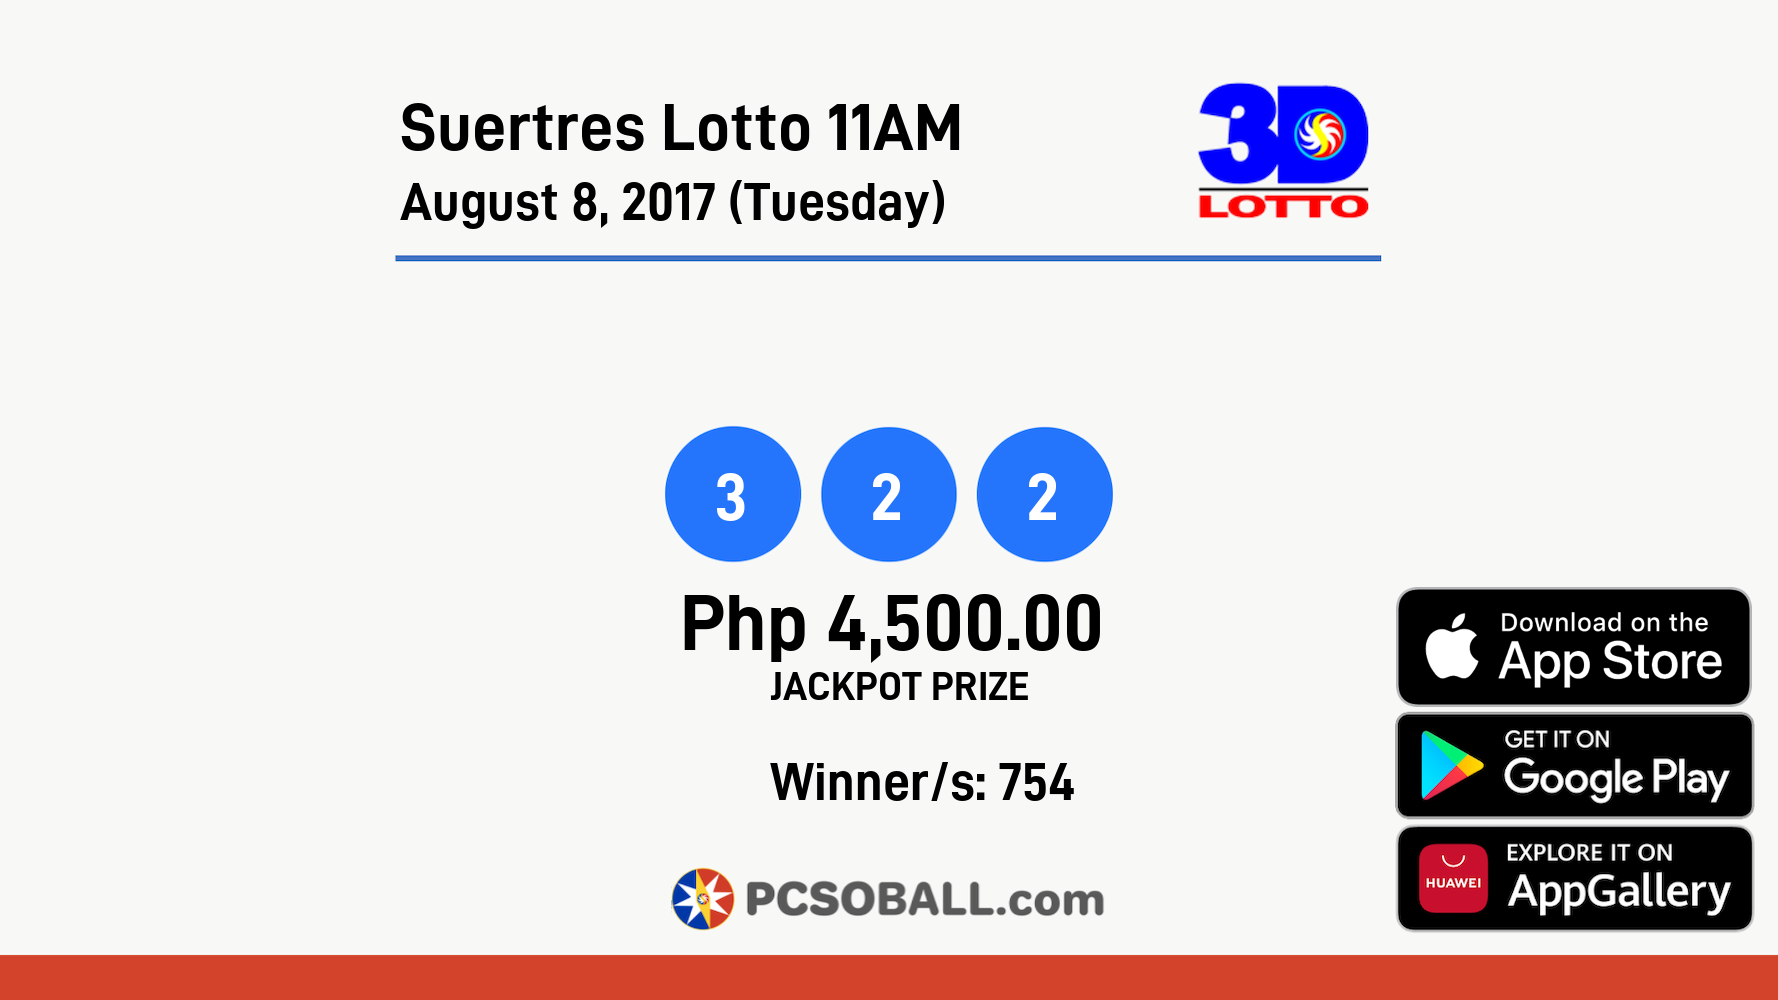 Suertres Lotto 11AM August 8, 2017 (Tuesday) Result